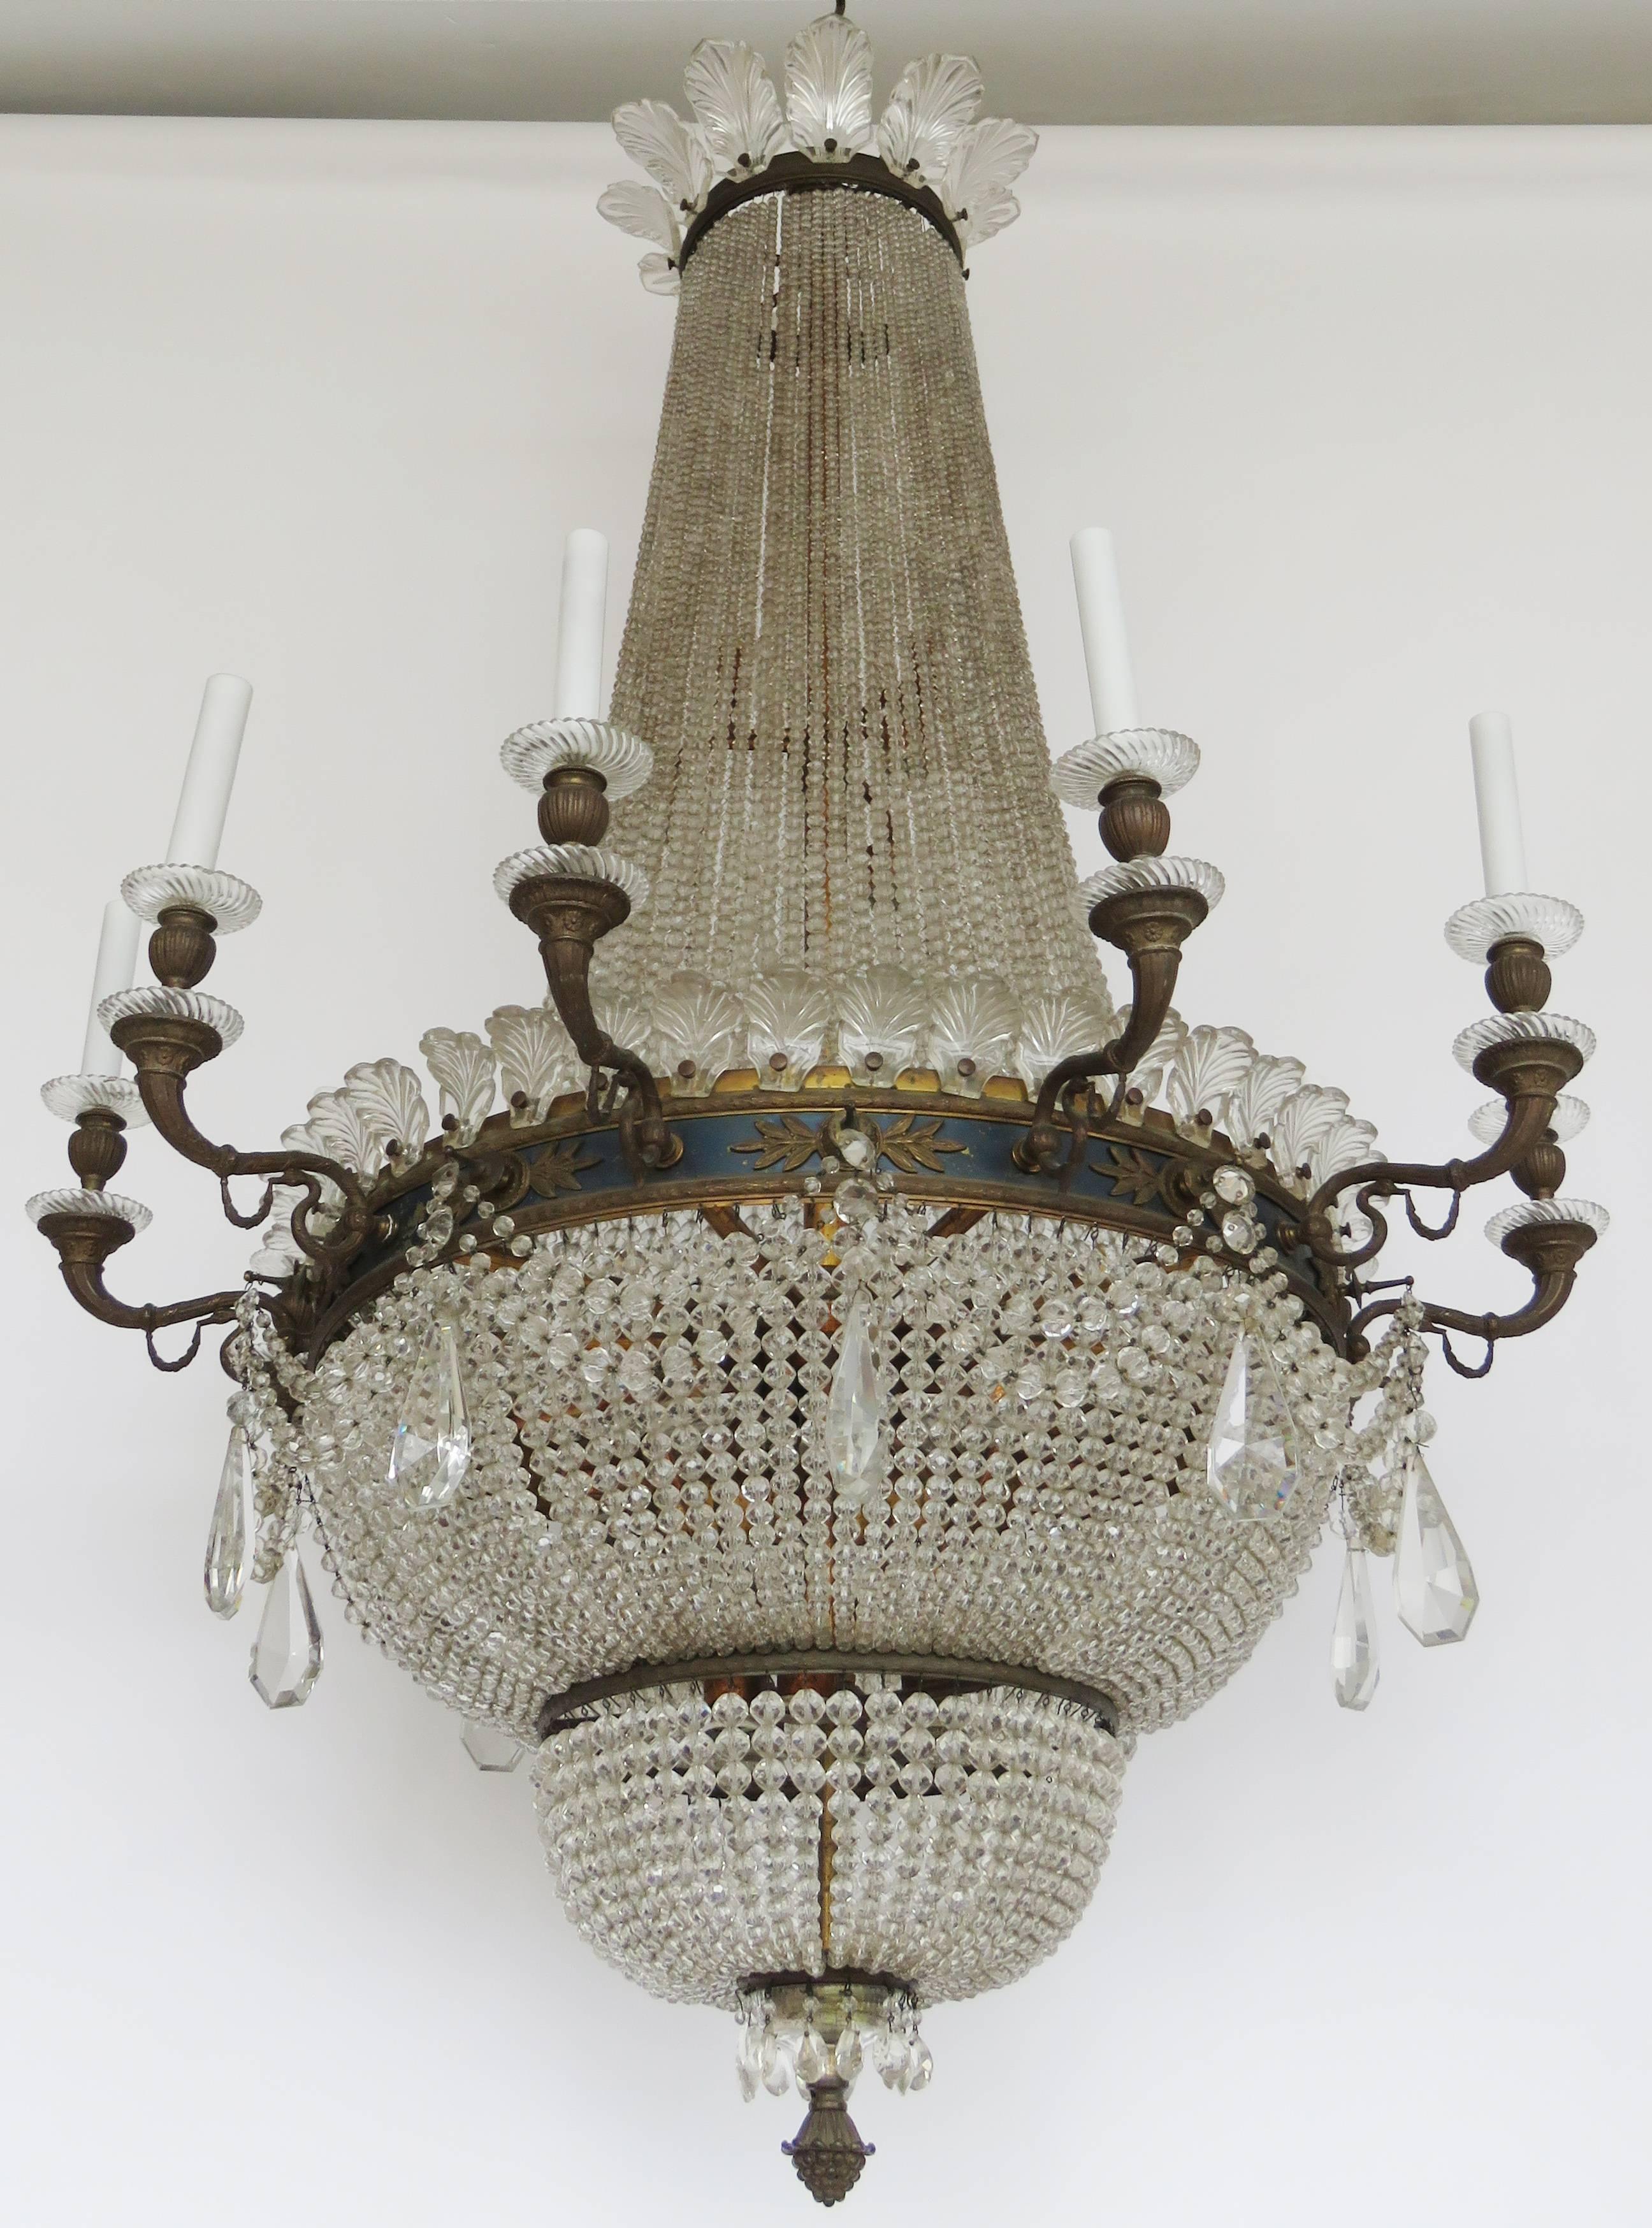 The corona with glass palmettes supports faceted chains falling to a gilt ring issuing candle light arms and glass bobèches above a double basket form.